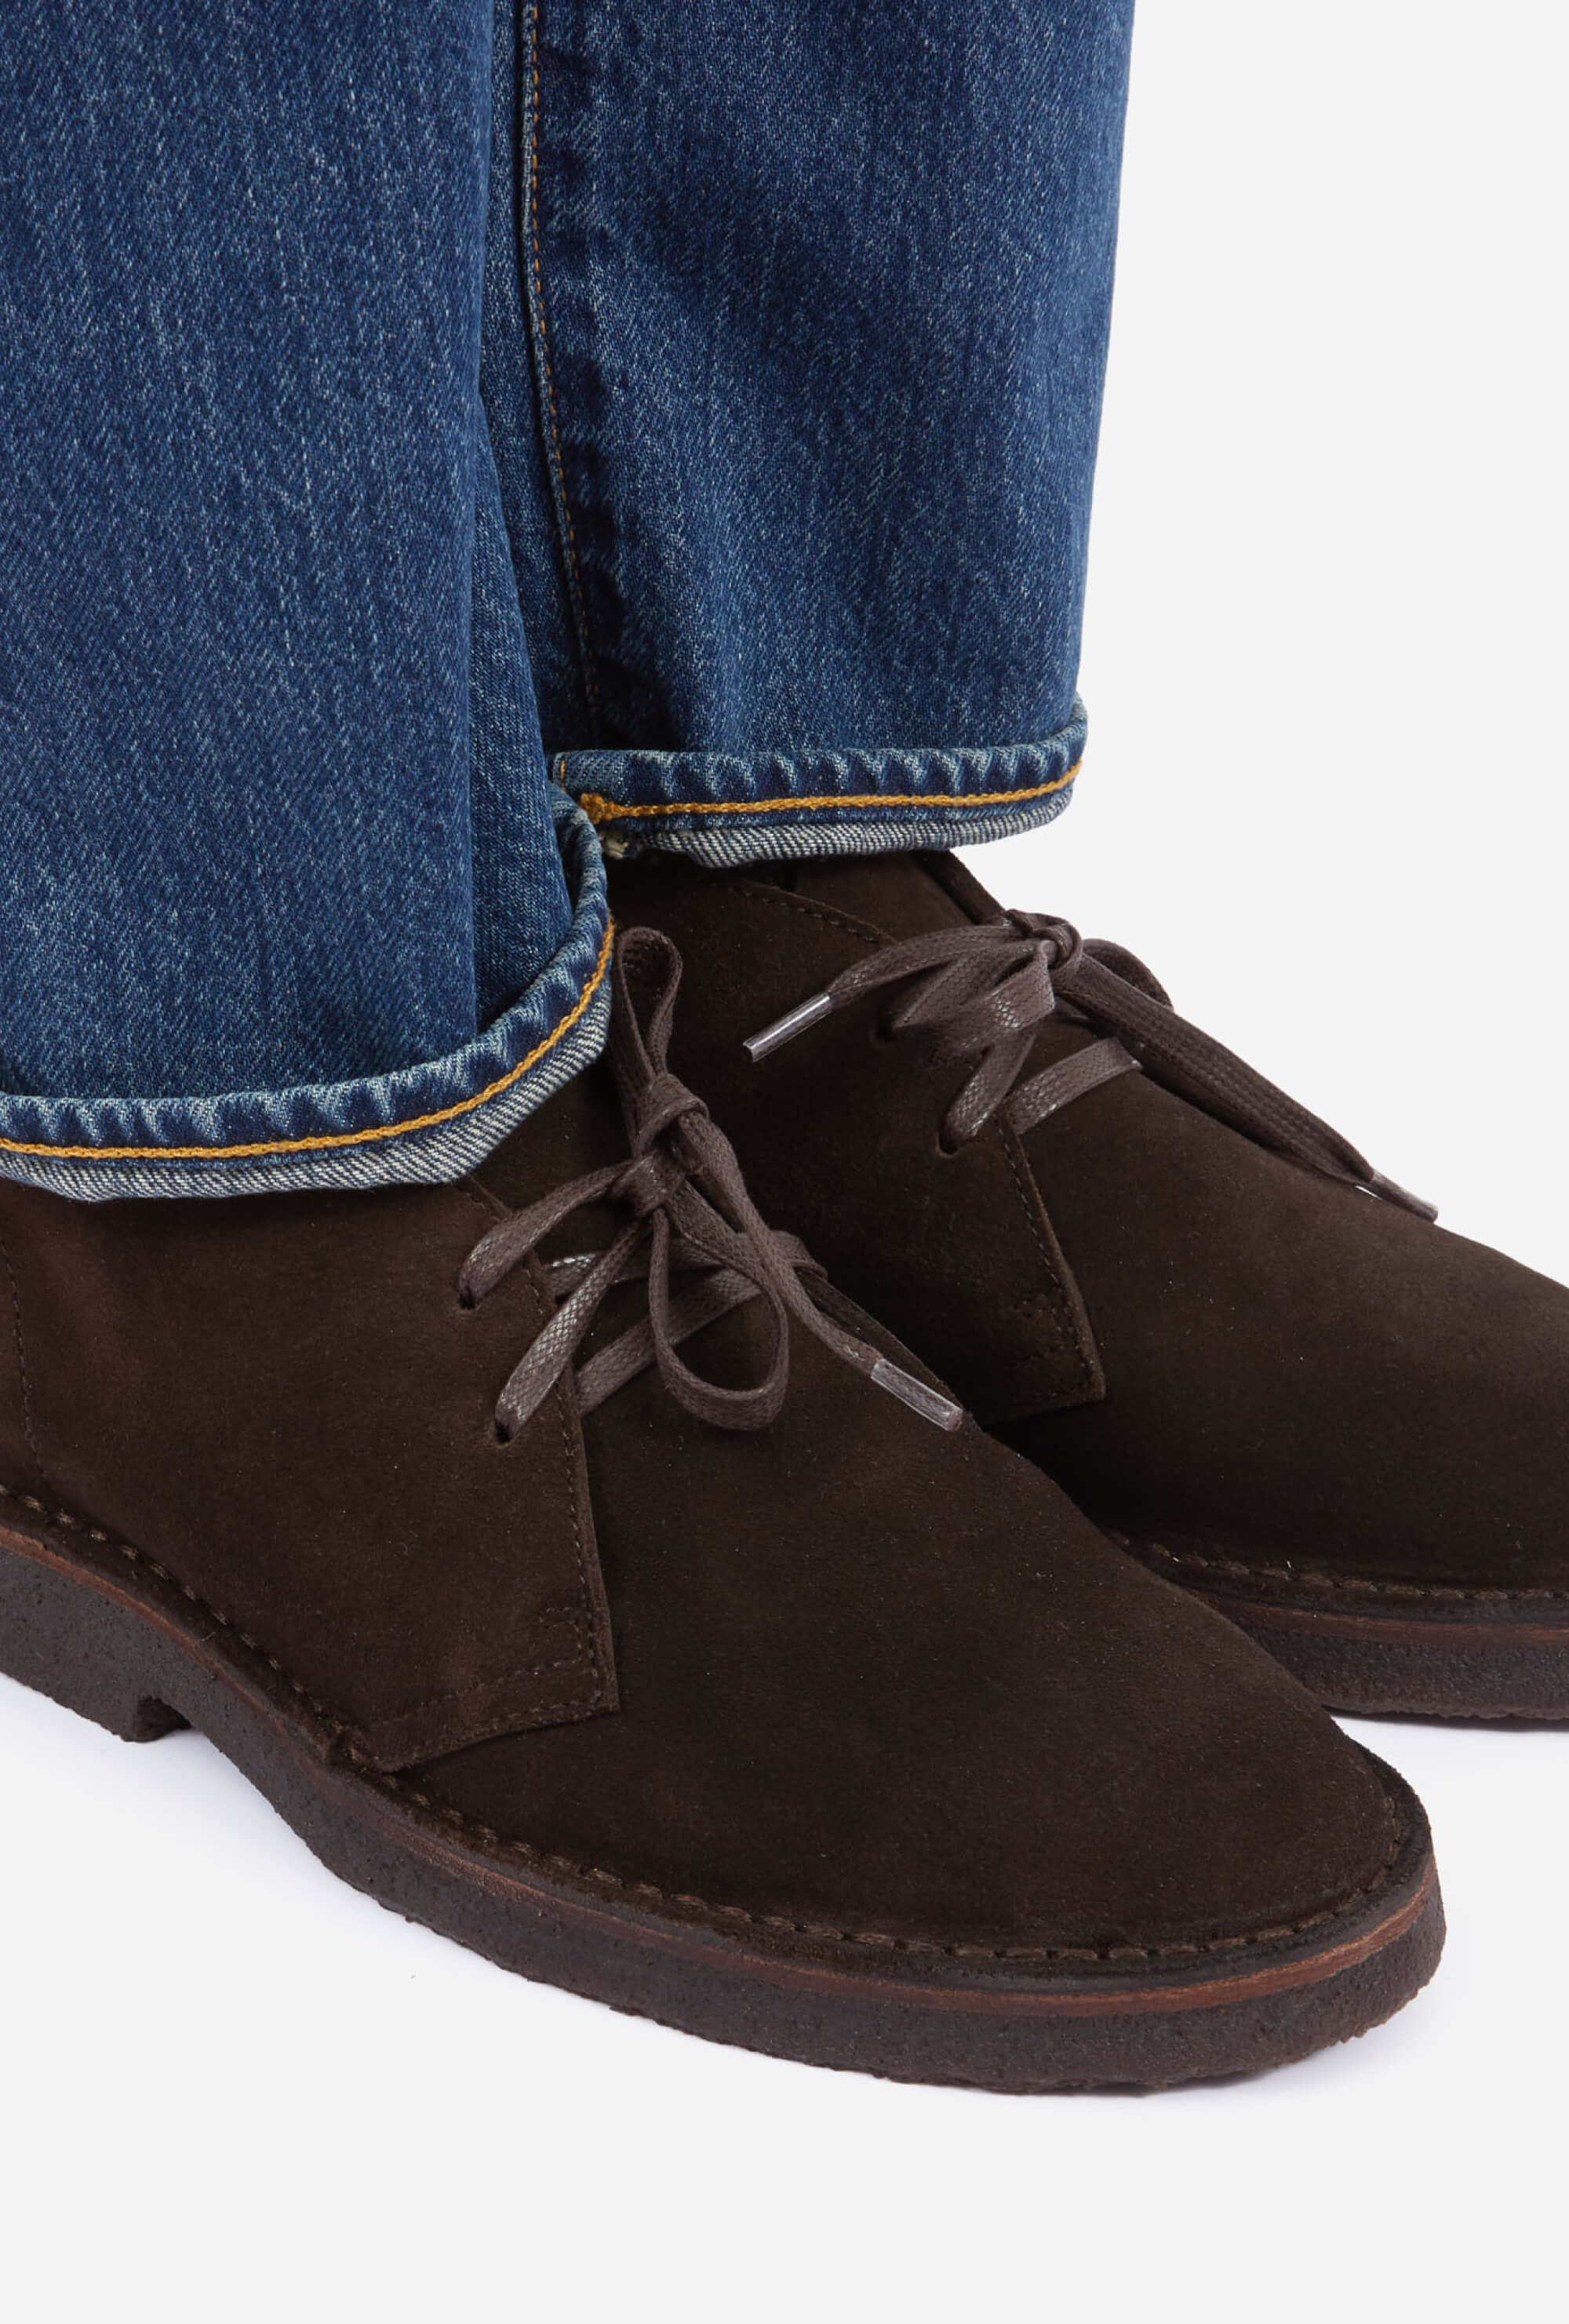 Desert Boot Crepe Sole Chocolate Suede